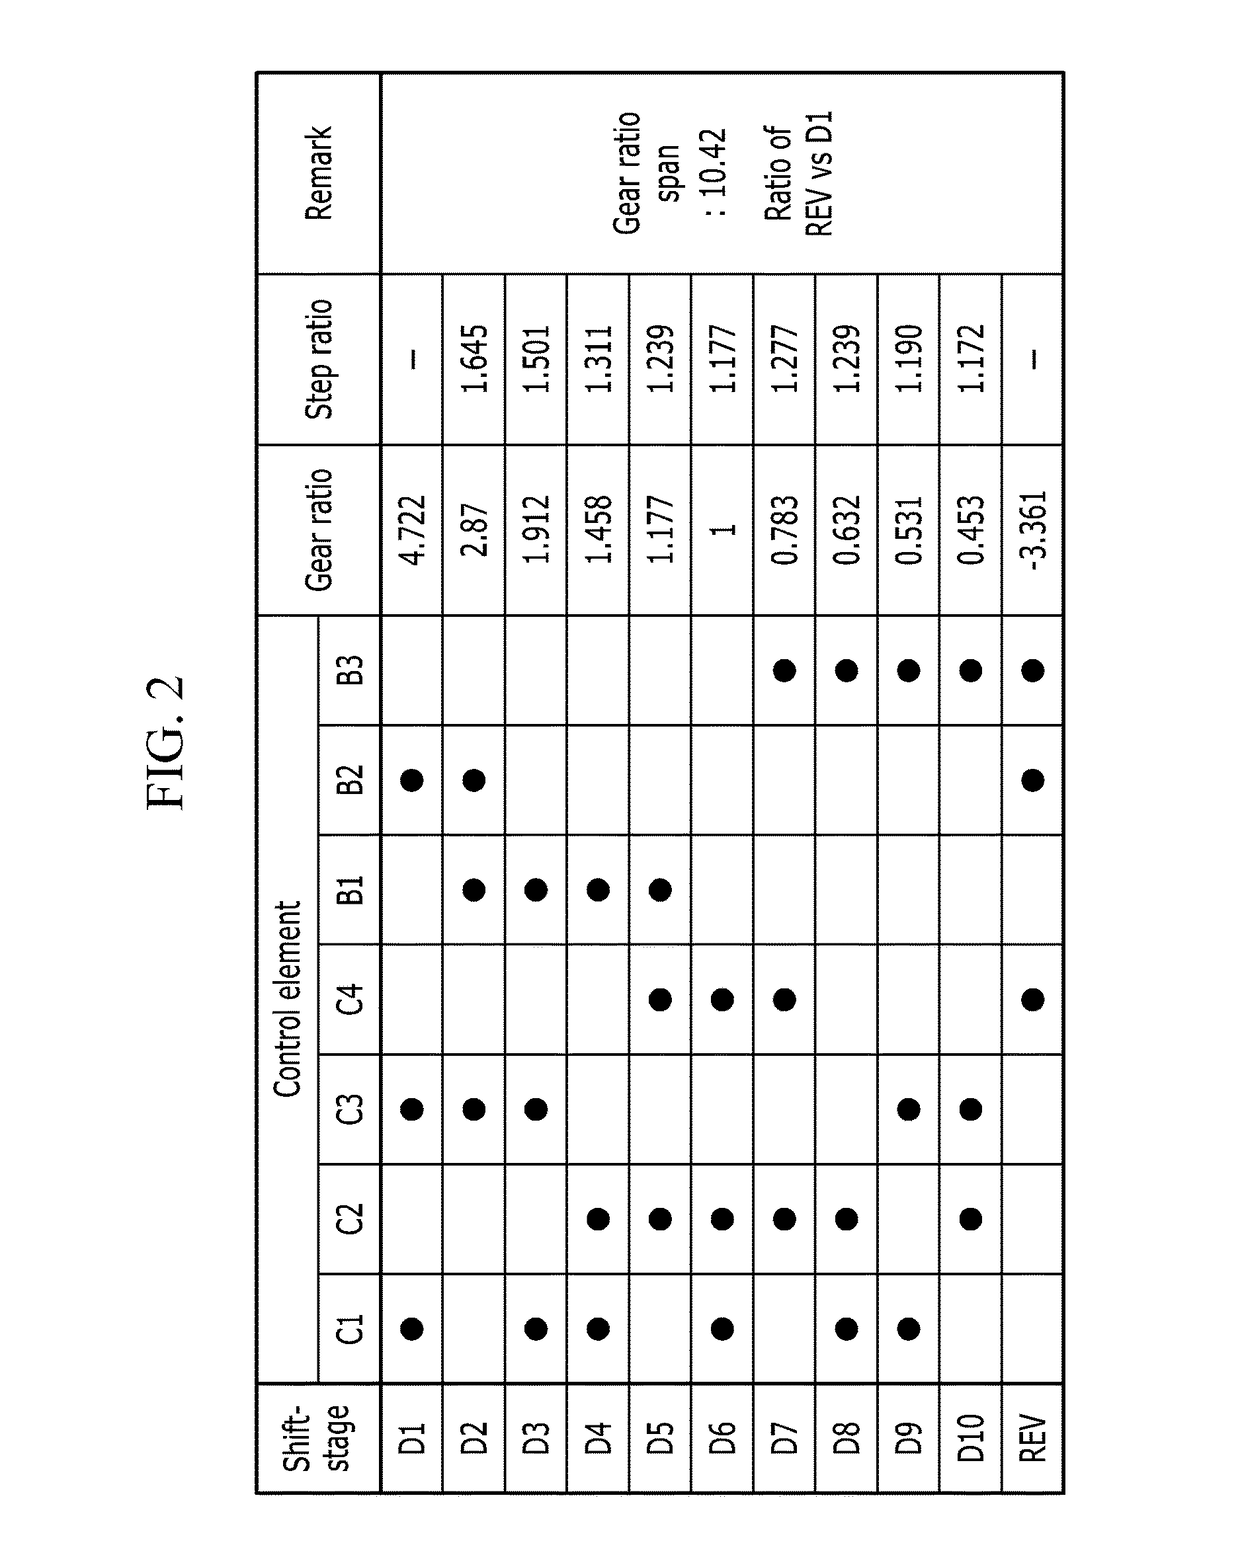 Planetary gear train of automatic transmission for a vehicle